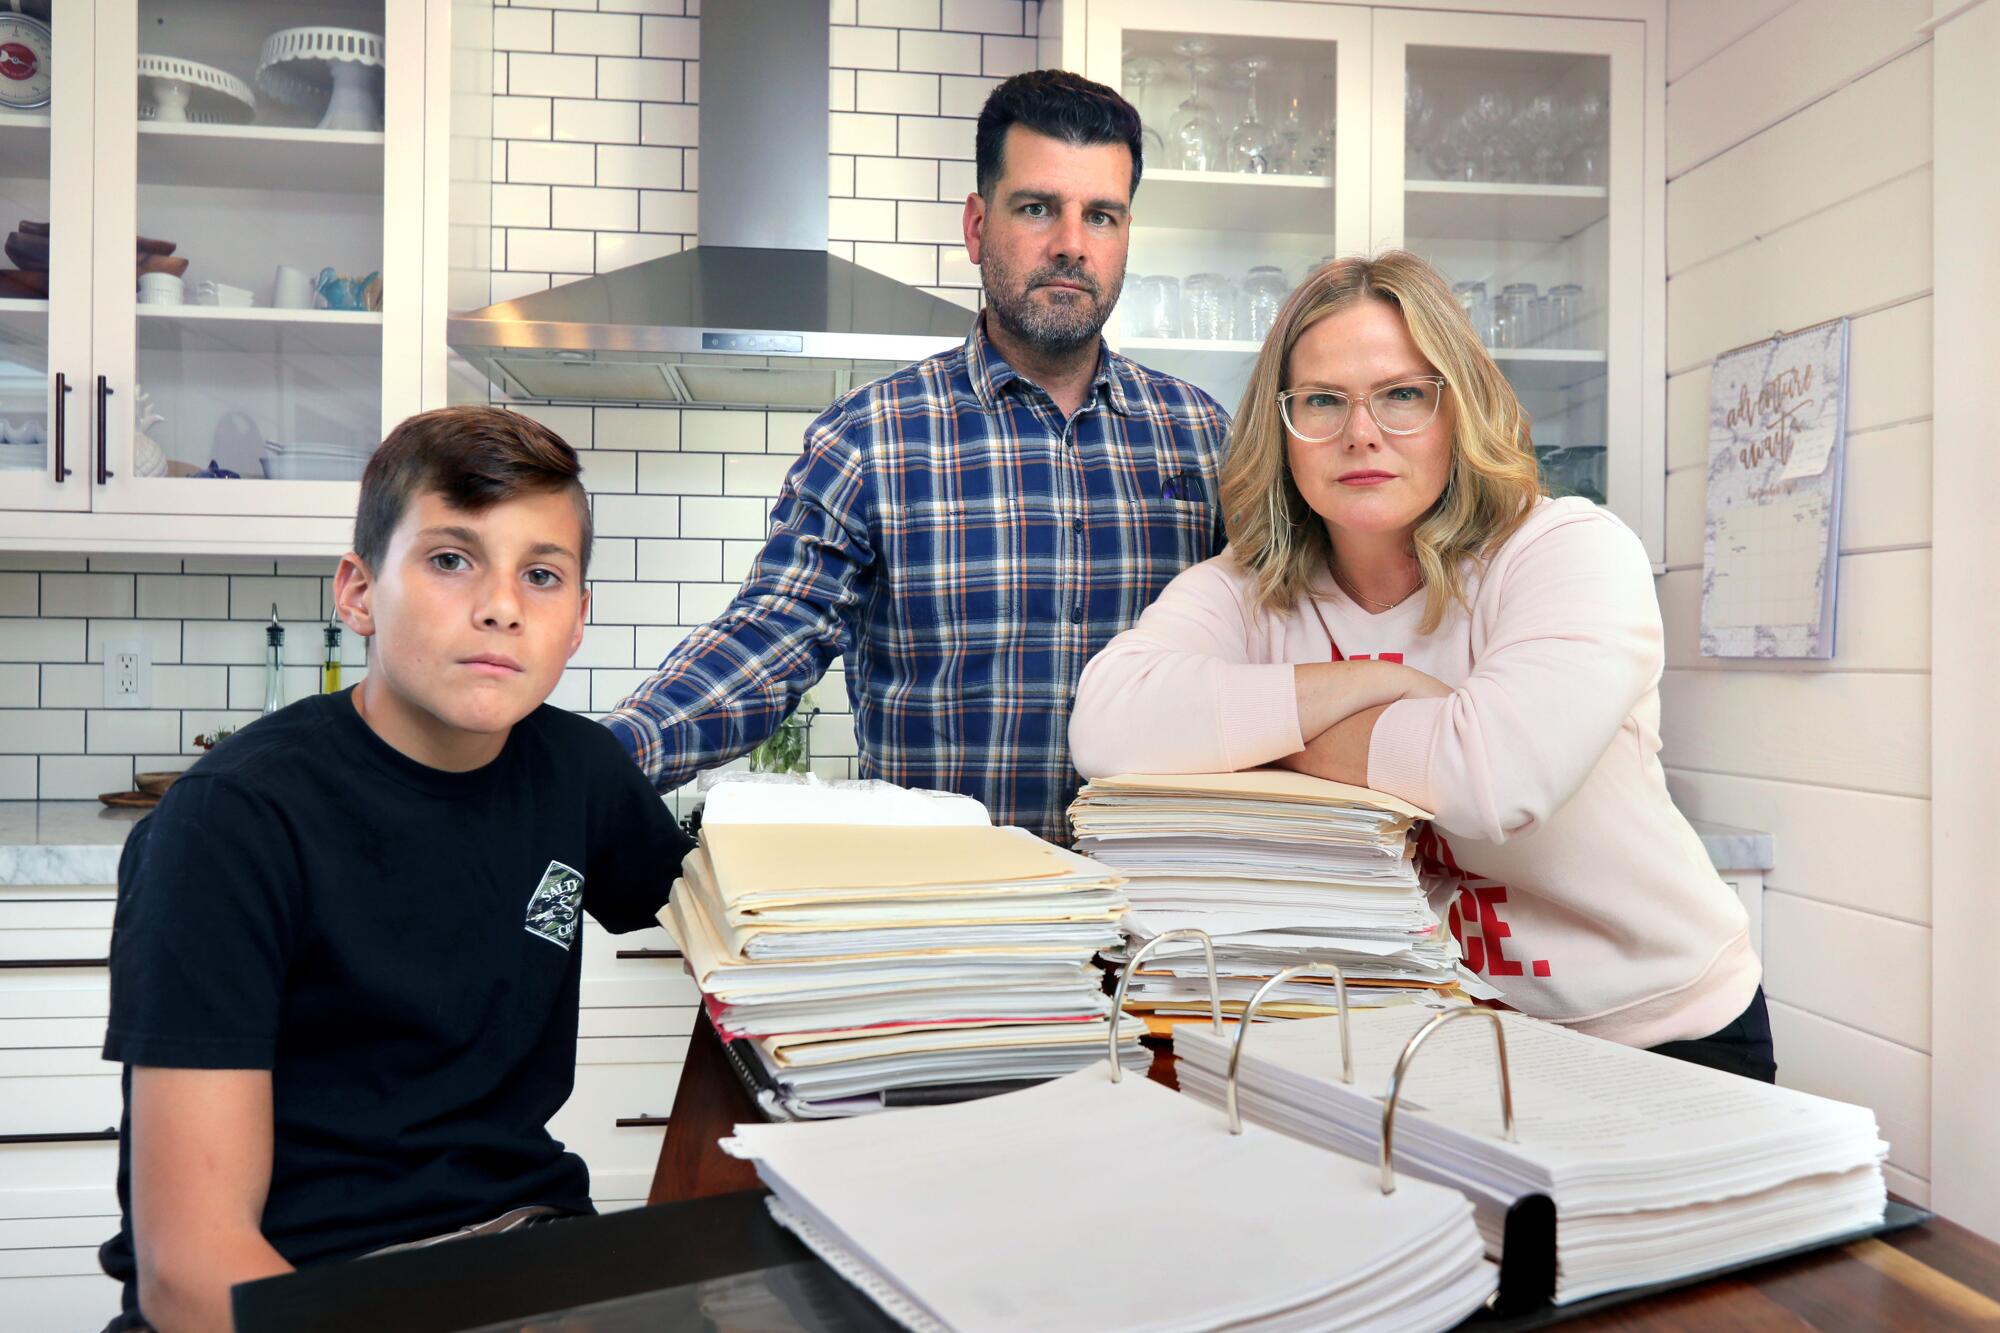 Diego Lazaro, 12, and his parents Oscar and Melissa Lazaro with all of the paperwork they've accumulated in their years-long effort to get Diego the education they feel he deserves with his dyslexia.